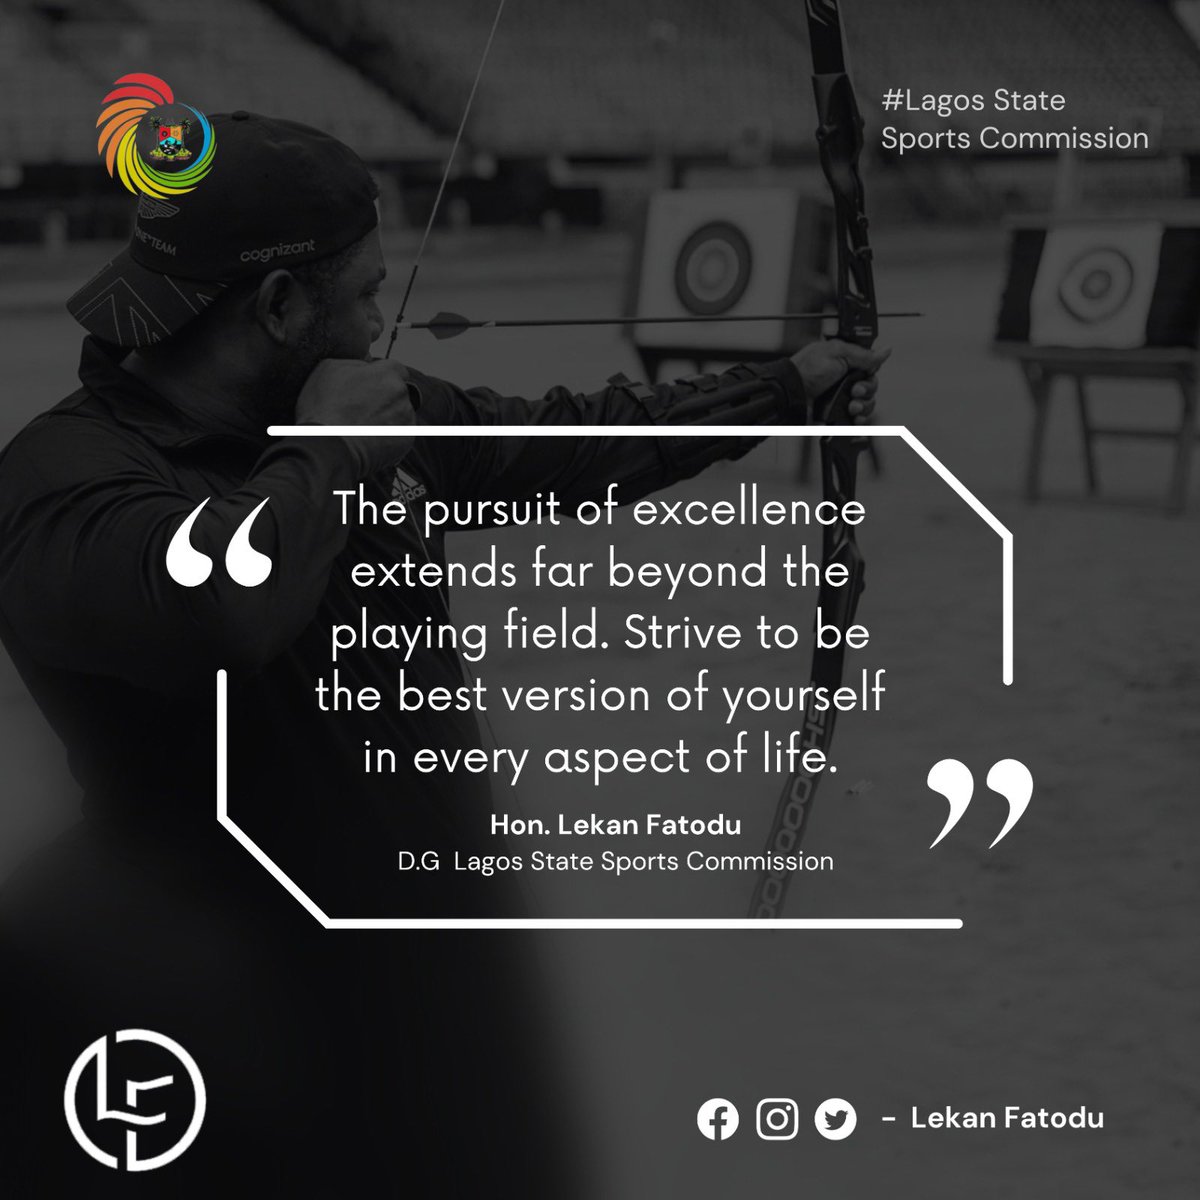 The pursuit of excellence extends far beyond the playing field. Strive to be the best version of yourself in every aspect of life. Have a great week.

#MondayMotivation #lagosstategovernment #lagosstatesportscommission